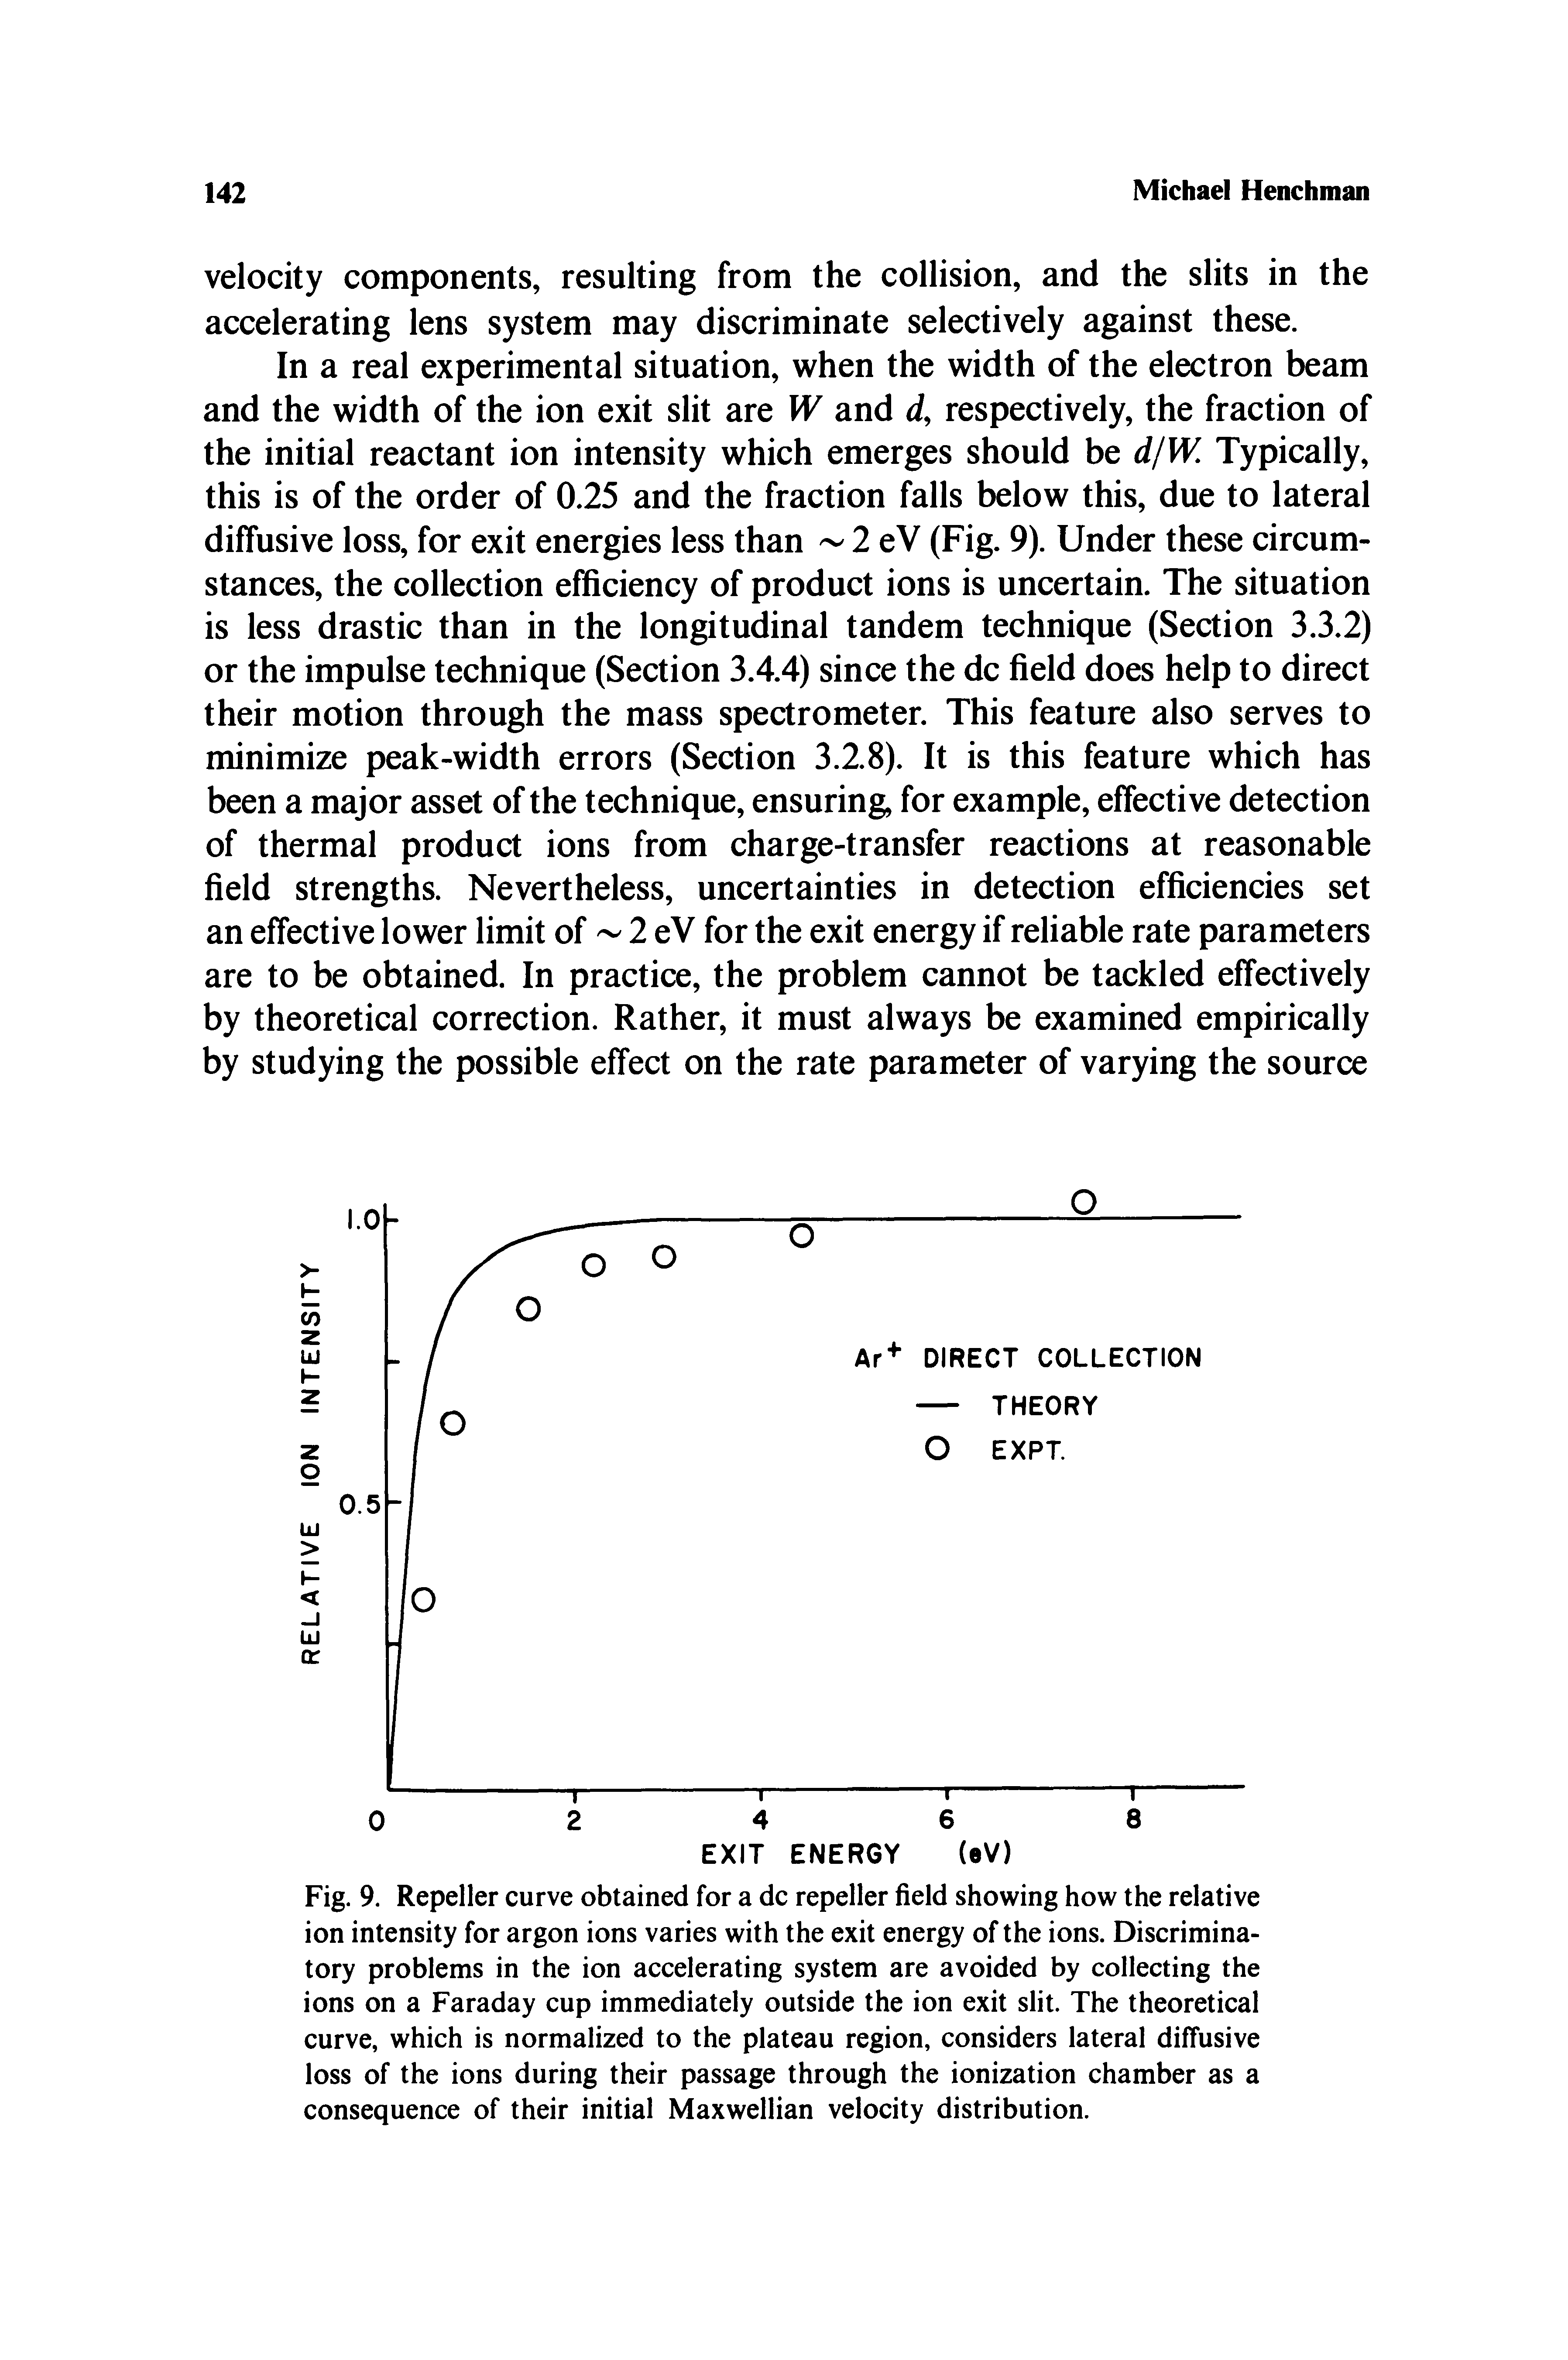 Fig. 9. Repeller curve obtained for a dc repeller field showing how the relative ion intensity for argon ions varies with the exit energy of the ions. Discriminatory problems in the ion accelerating system are avoided by collecting the ions on a Faraday cup immediately outside the ion exit slit. The theoretical curve, which is normalized to the plateau region, considers lateral diffusive loss of the ions during their passage through the ionization chamber as a consequence of their initial Maxwellian velocity distribution.